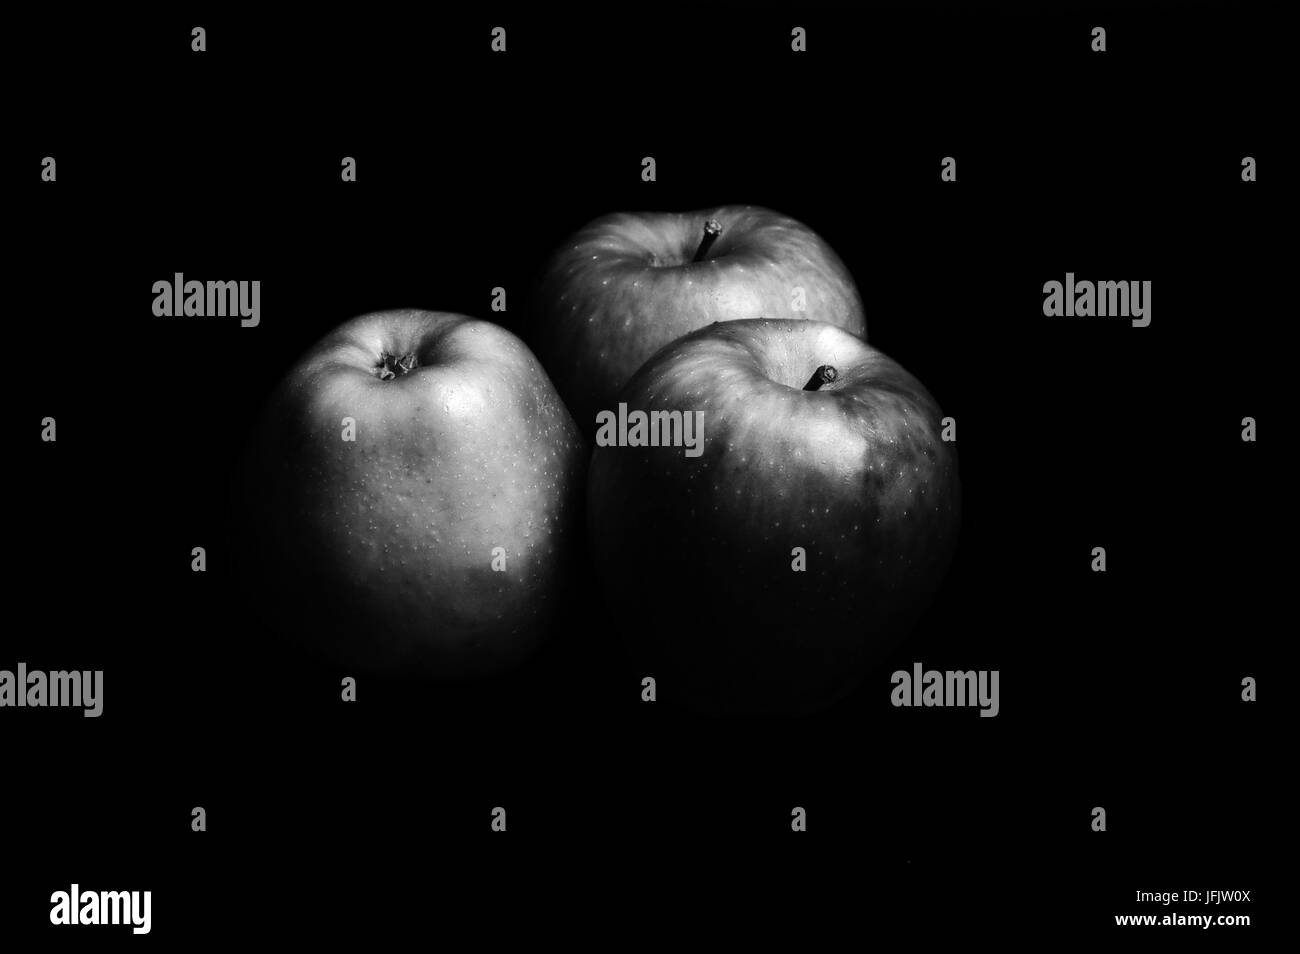 trhee apples with black and white, fruit Stock Photo